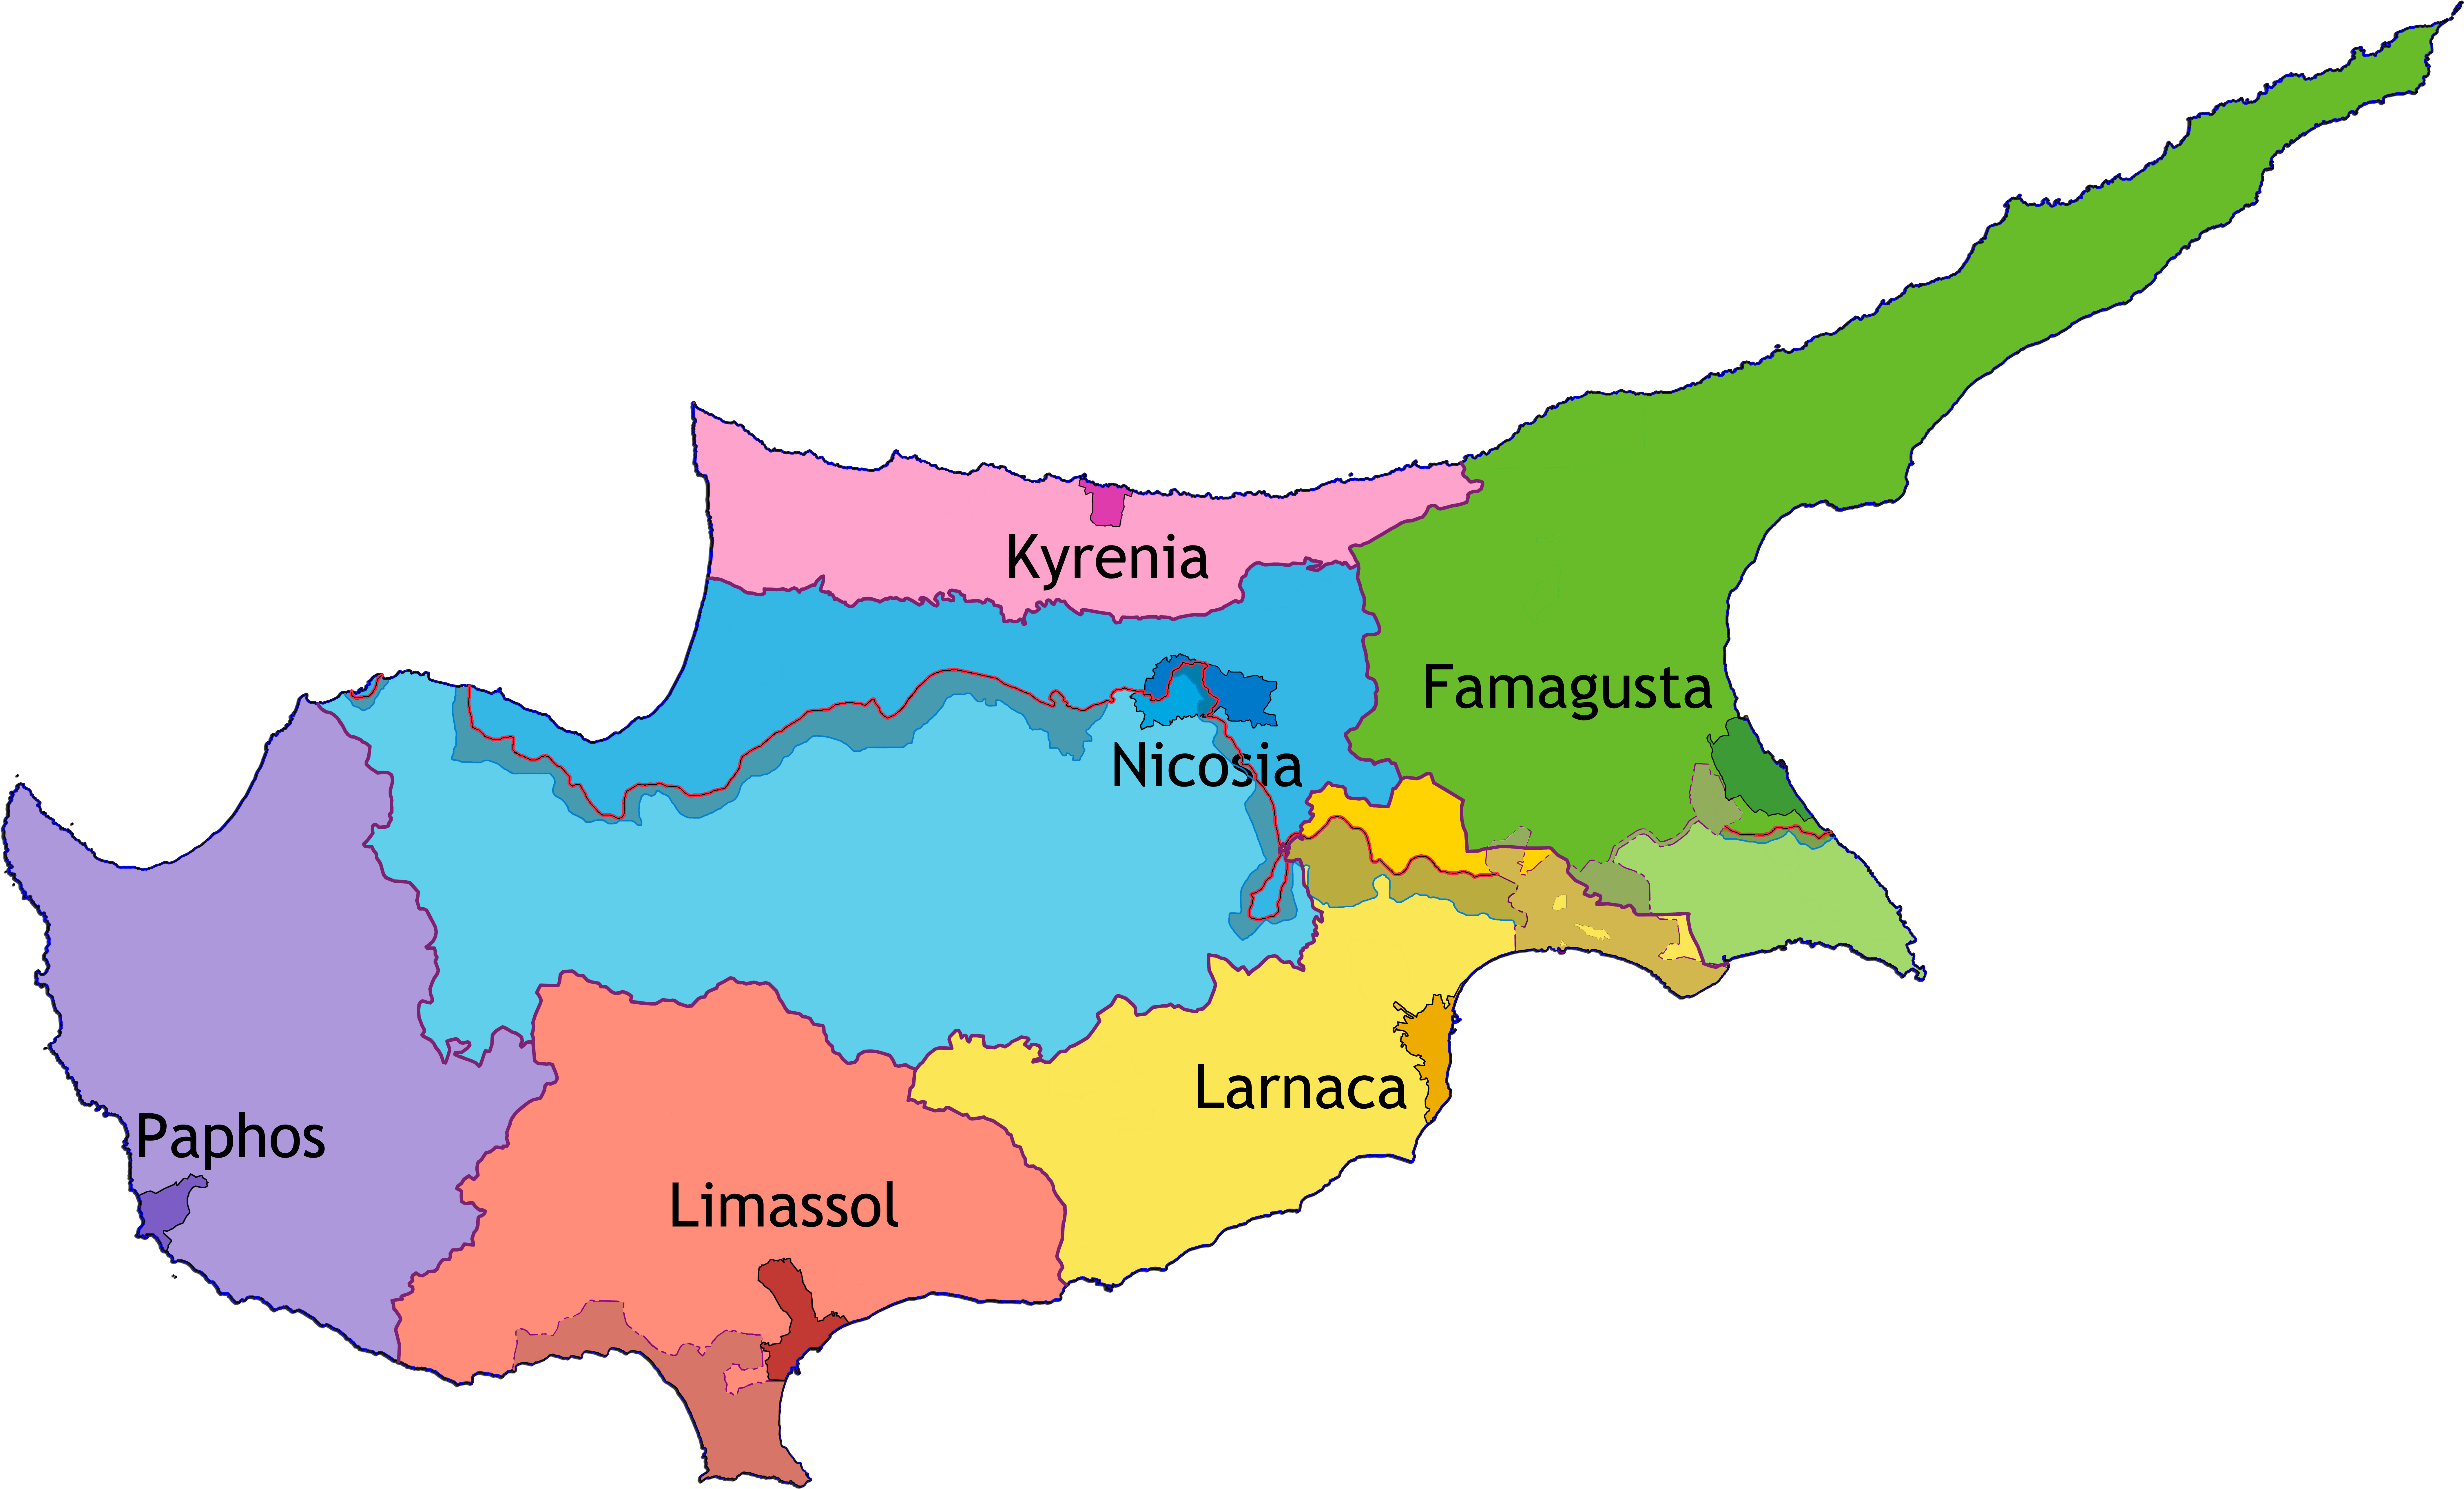 Cyprushomepage Cyprus Administrative Divisions Map - British Sovereign Bases Cyprus (8610x5270)